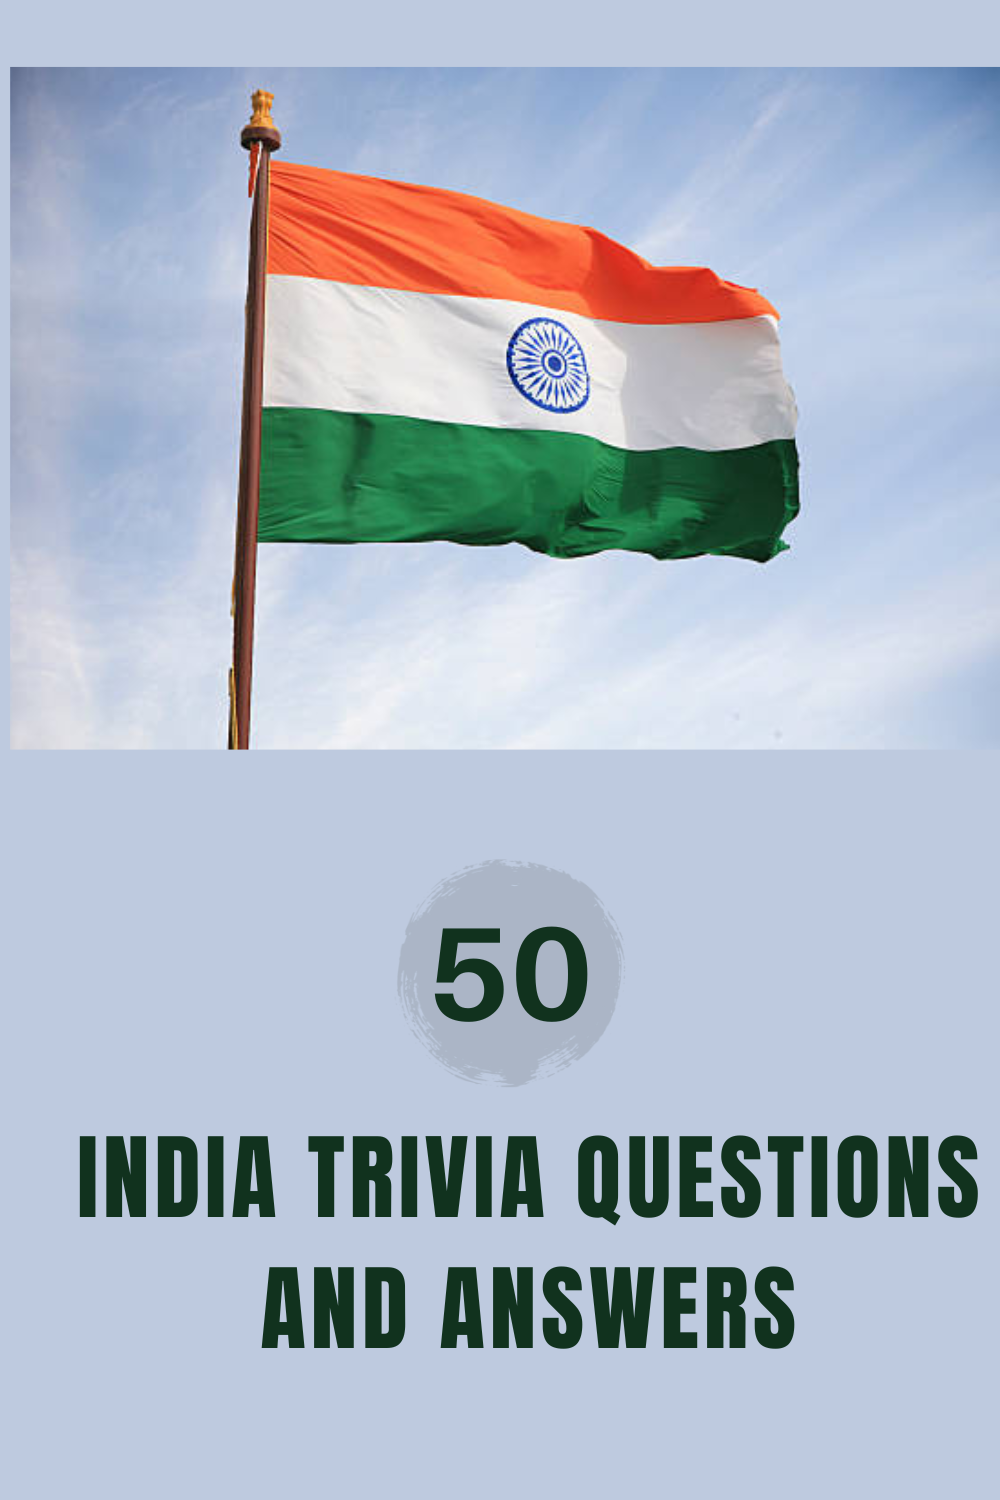 50 India Trivia Questions and Answers